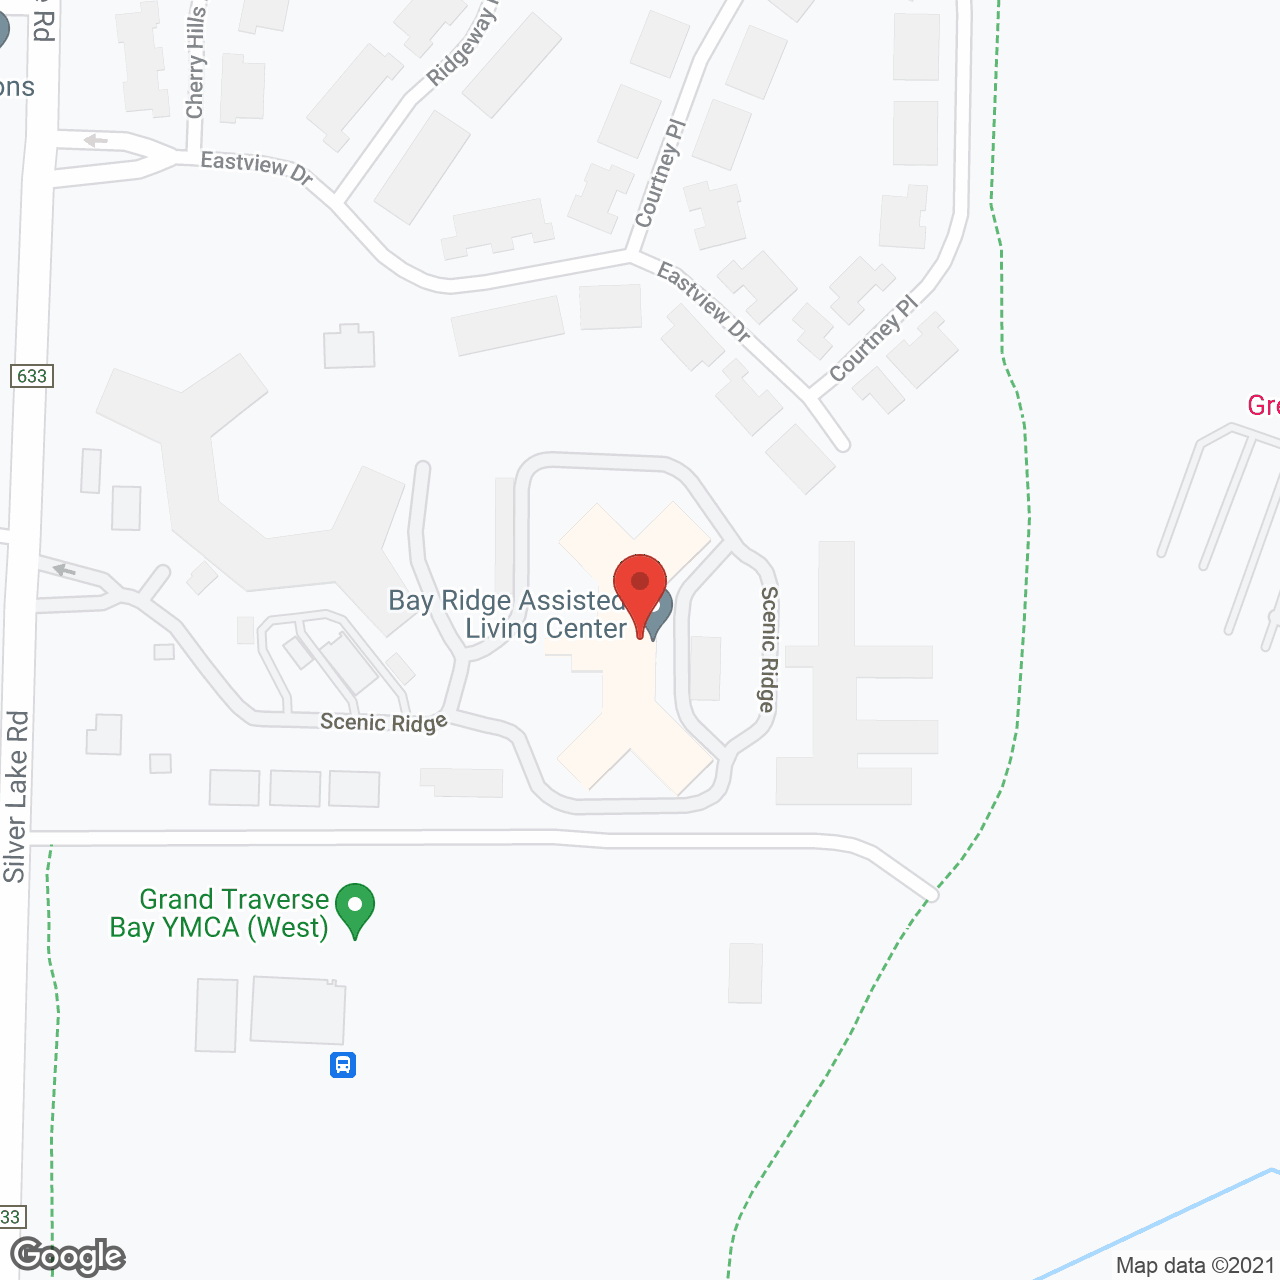 Bay Ridge Assisted Living Center in google map